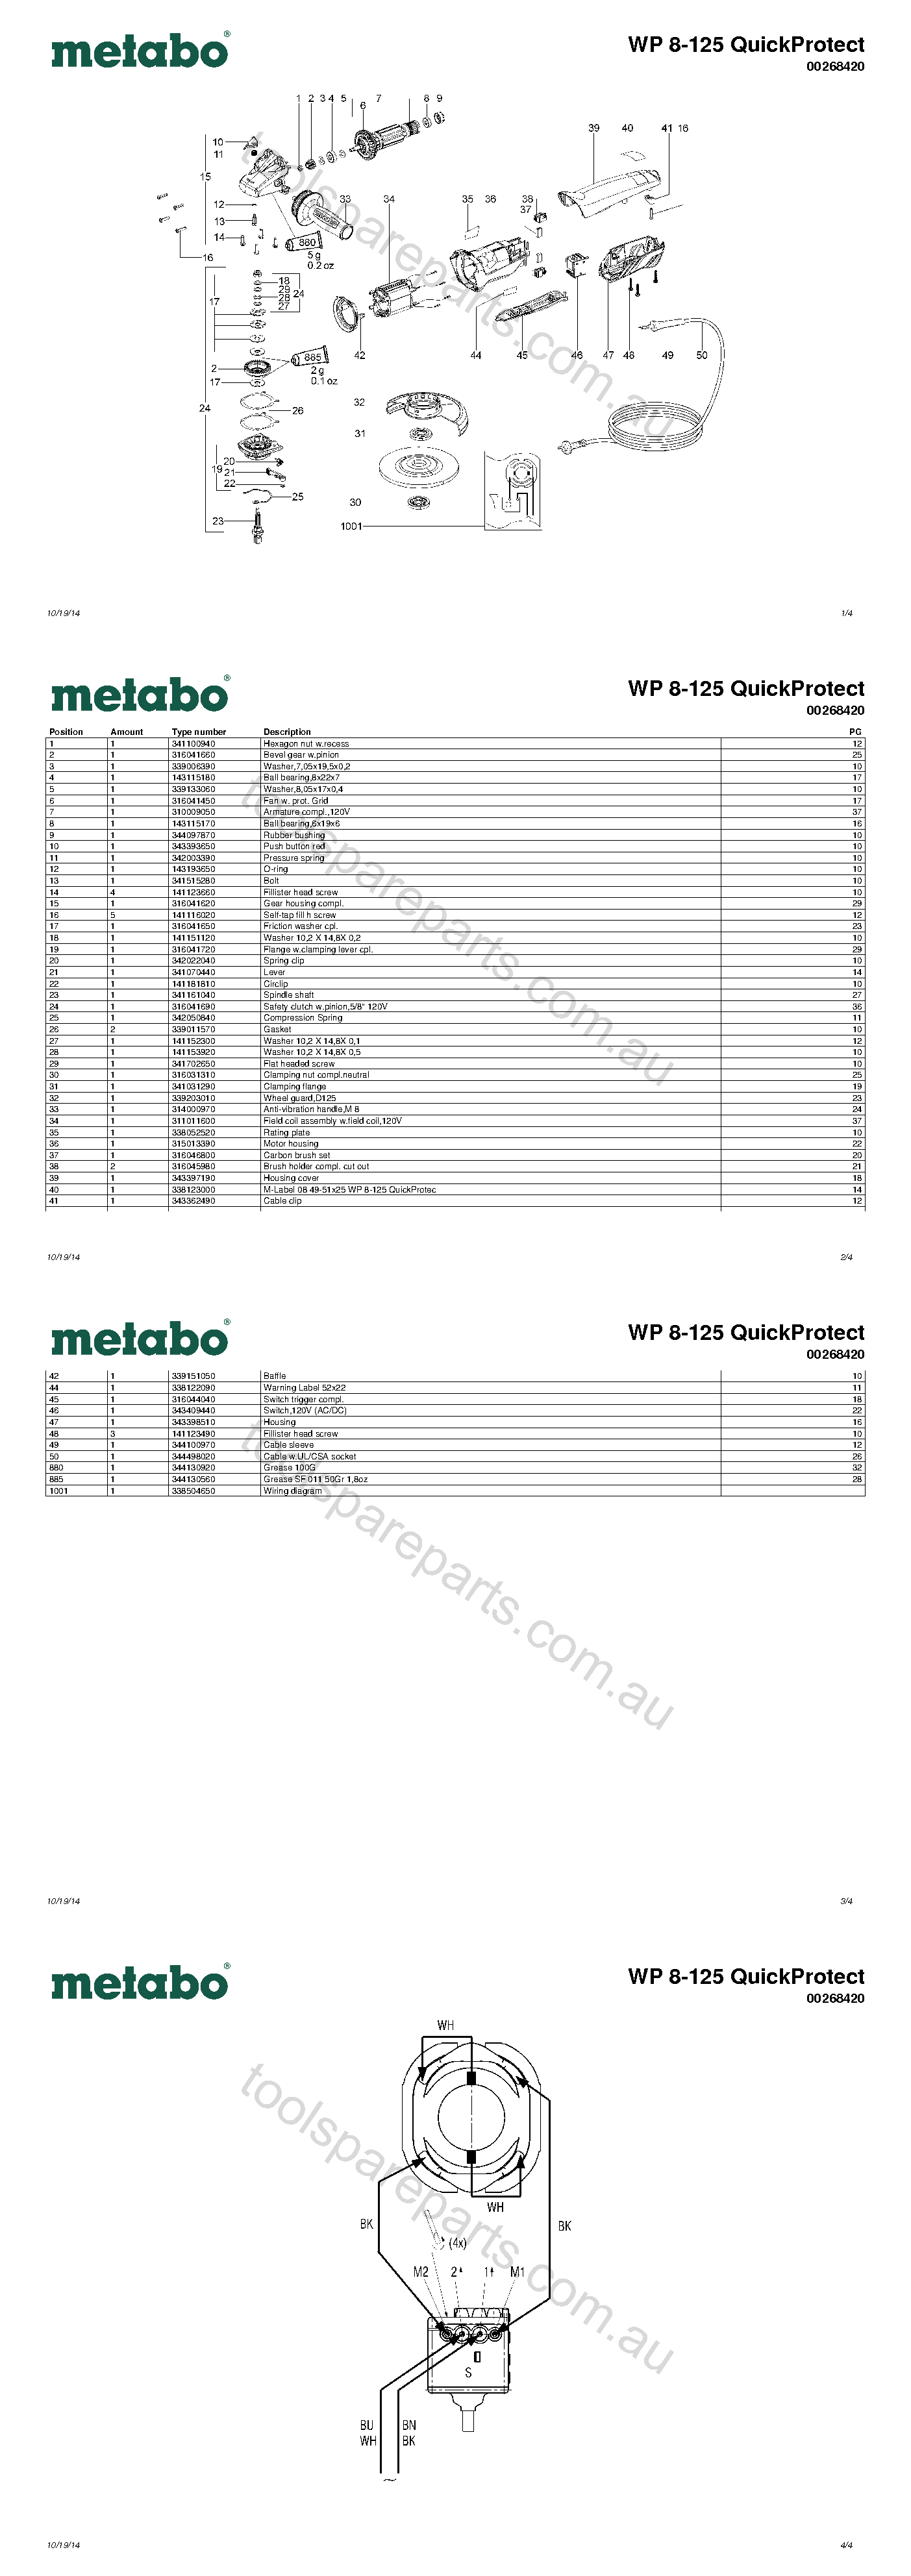 Metabo WP 8-125 QuickProtect 00268420  Diagram 1